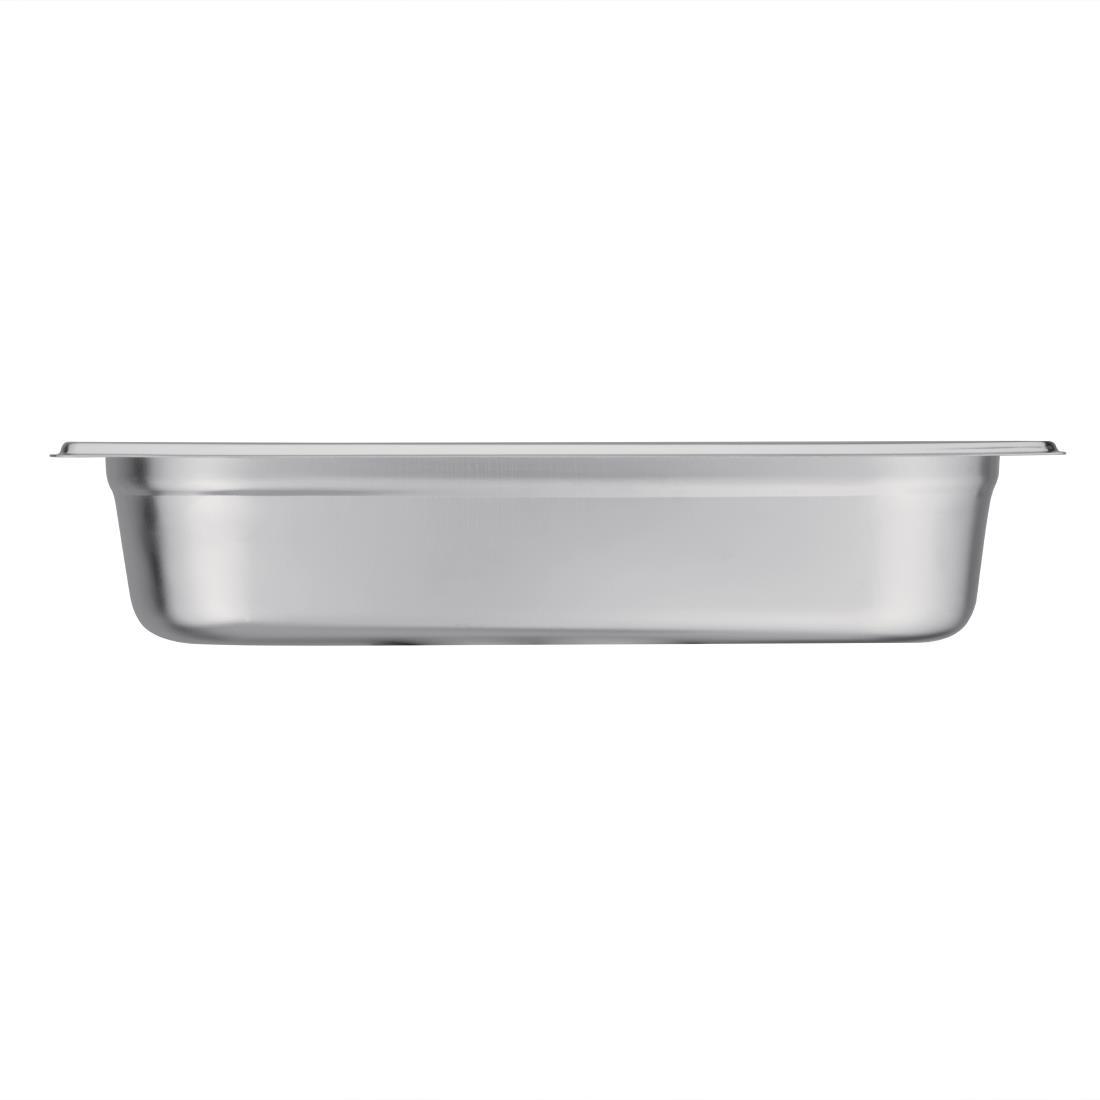 Vogue Stainless Steel 1/3 Gastronorm Pan 65mm - K929  - 5